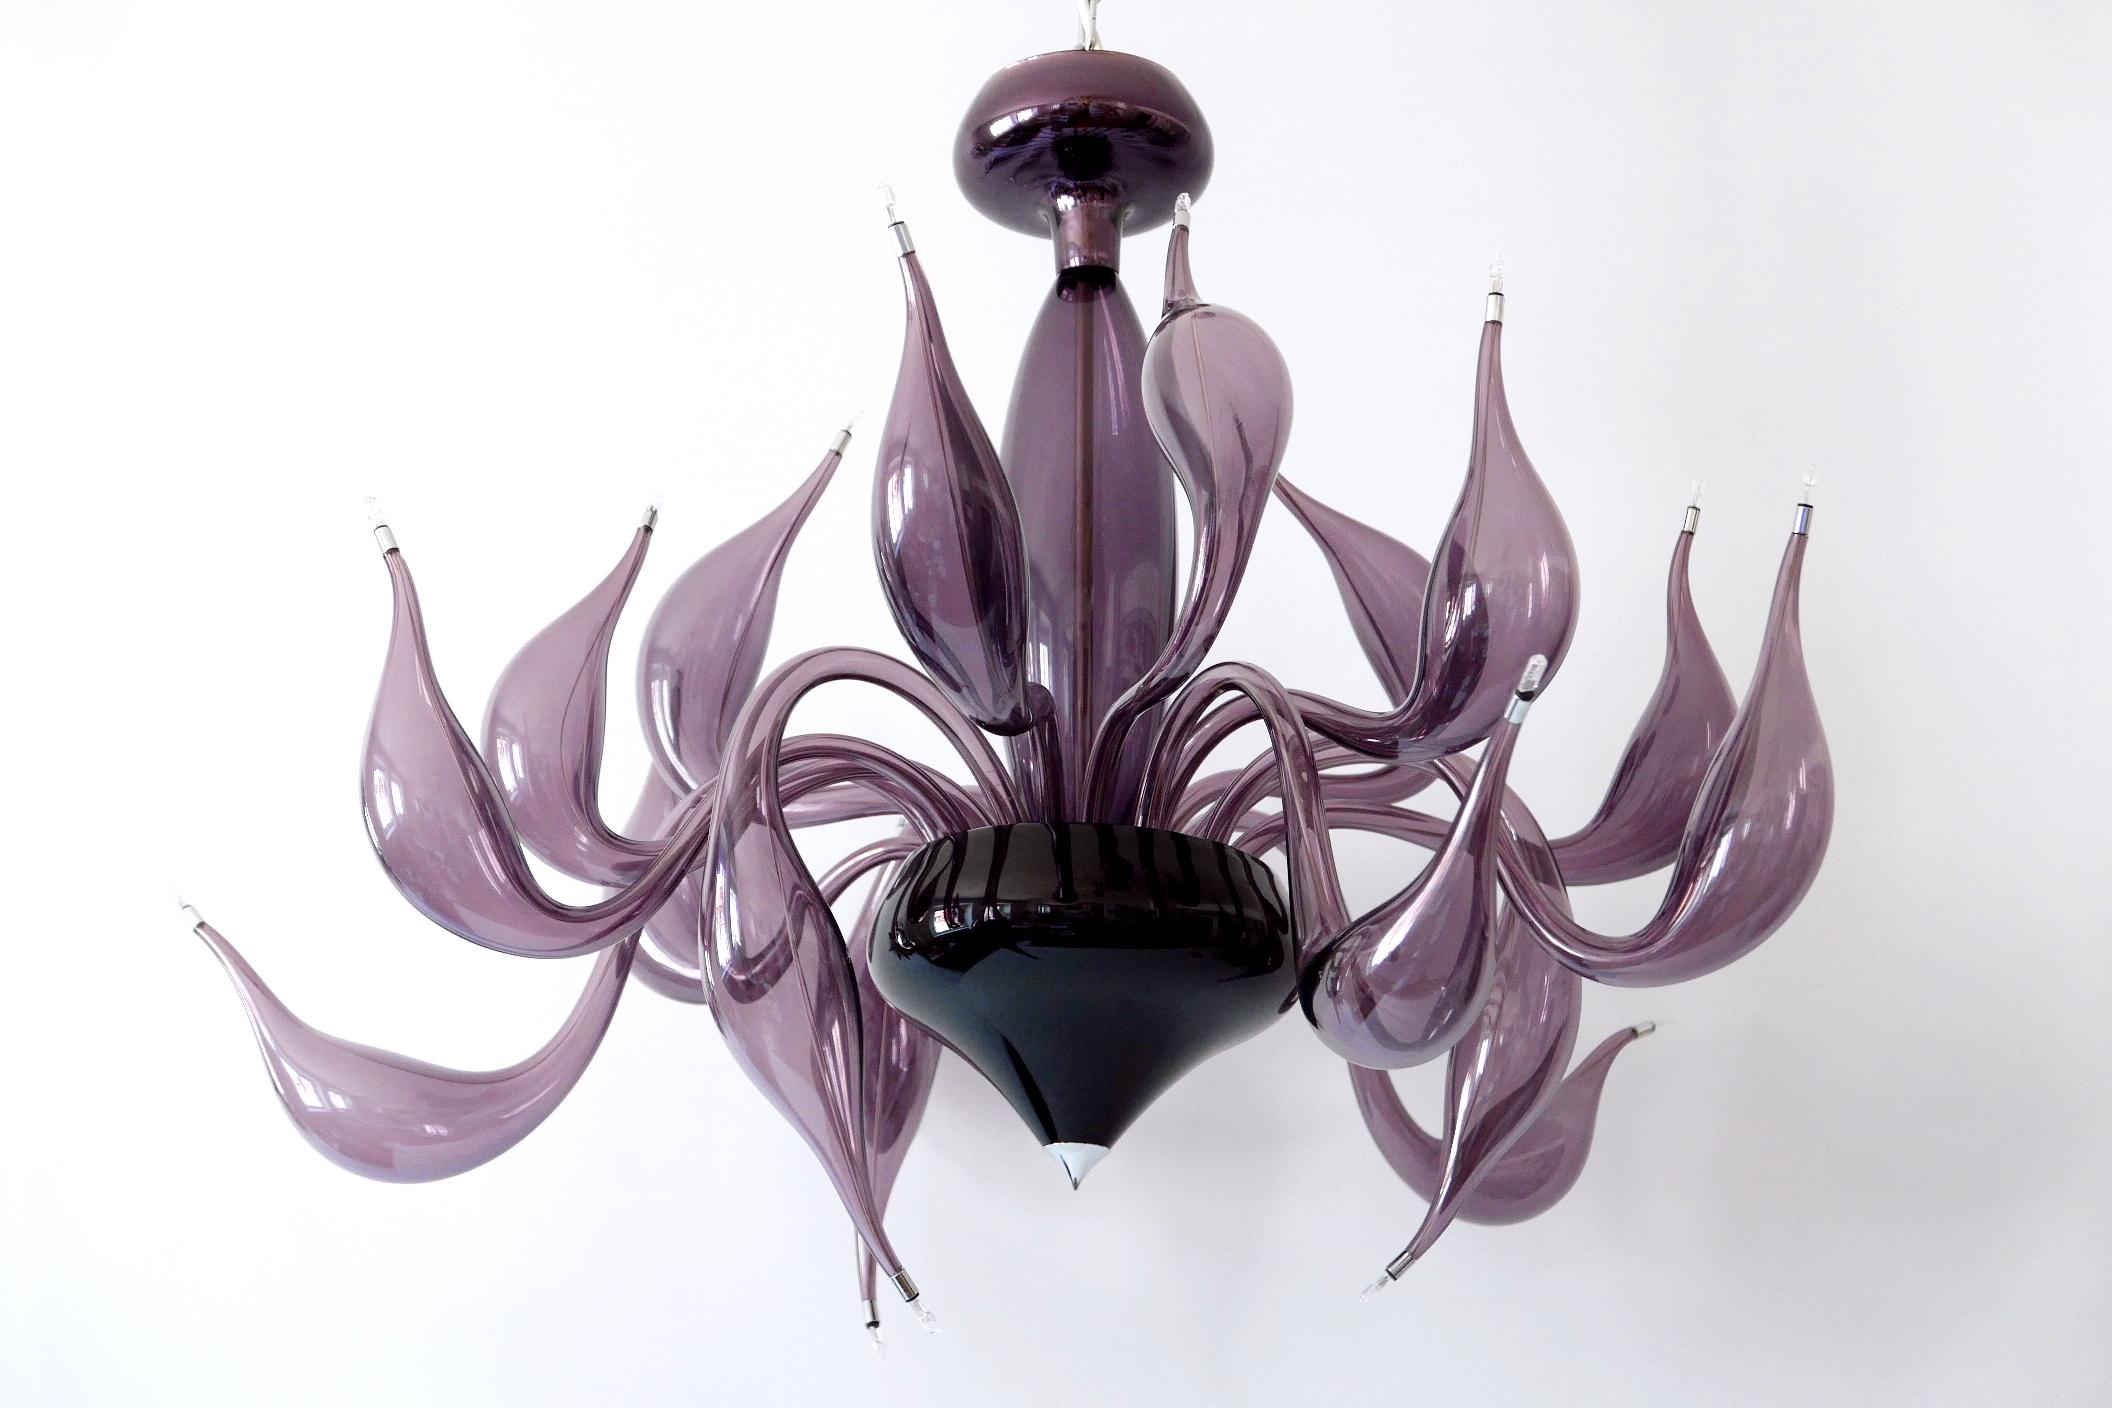 Murano Glass Sculptural Lu Murano Chandelier 18 Lights by Fabio Fornasier, 2004, Italy For Sale